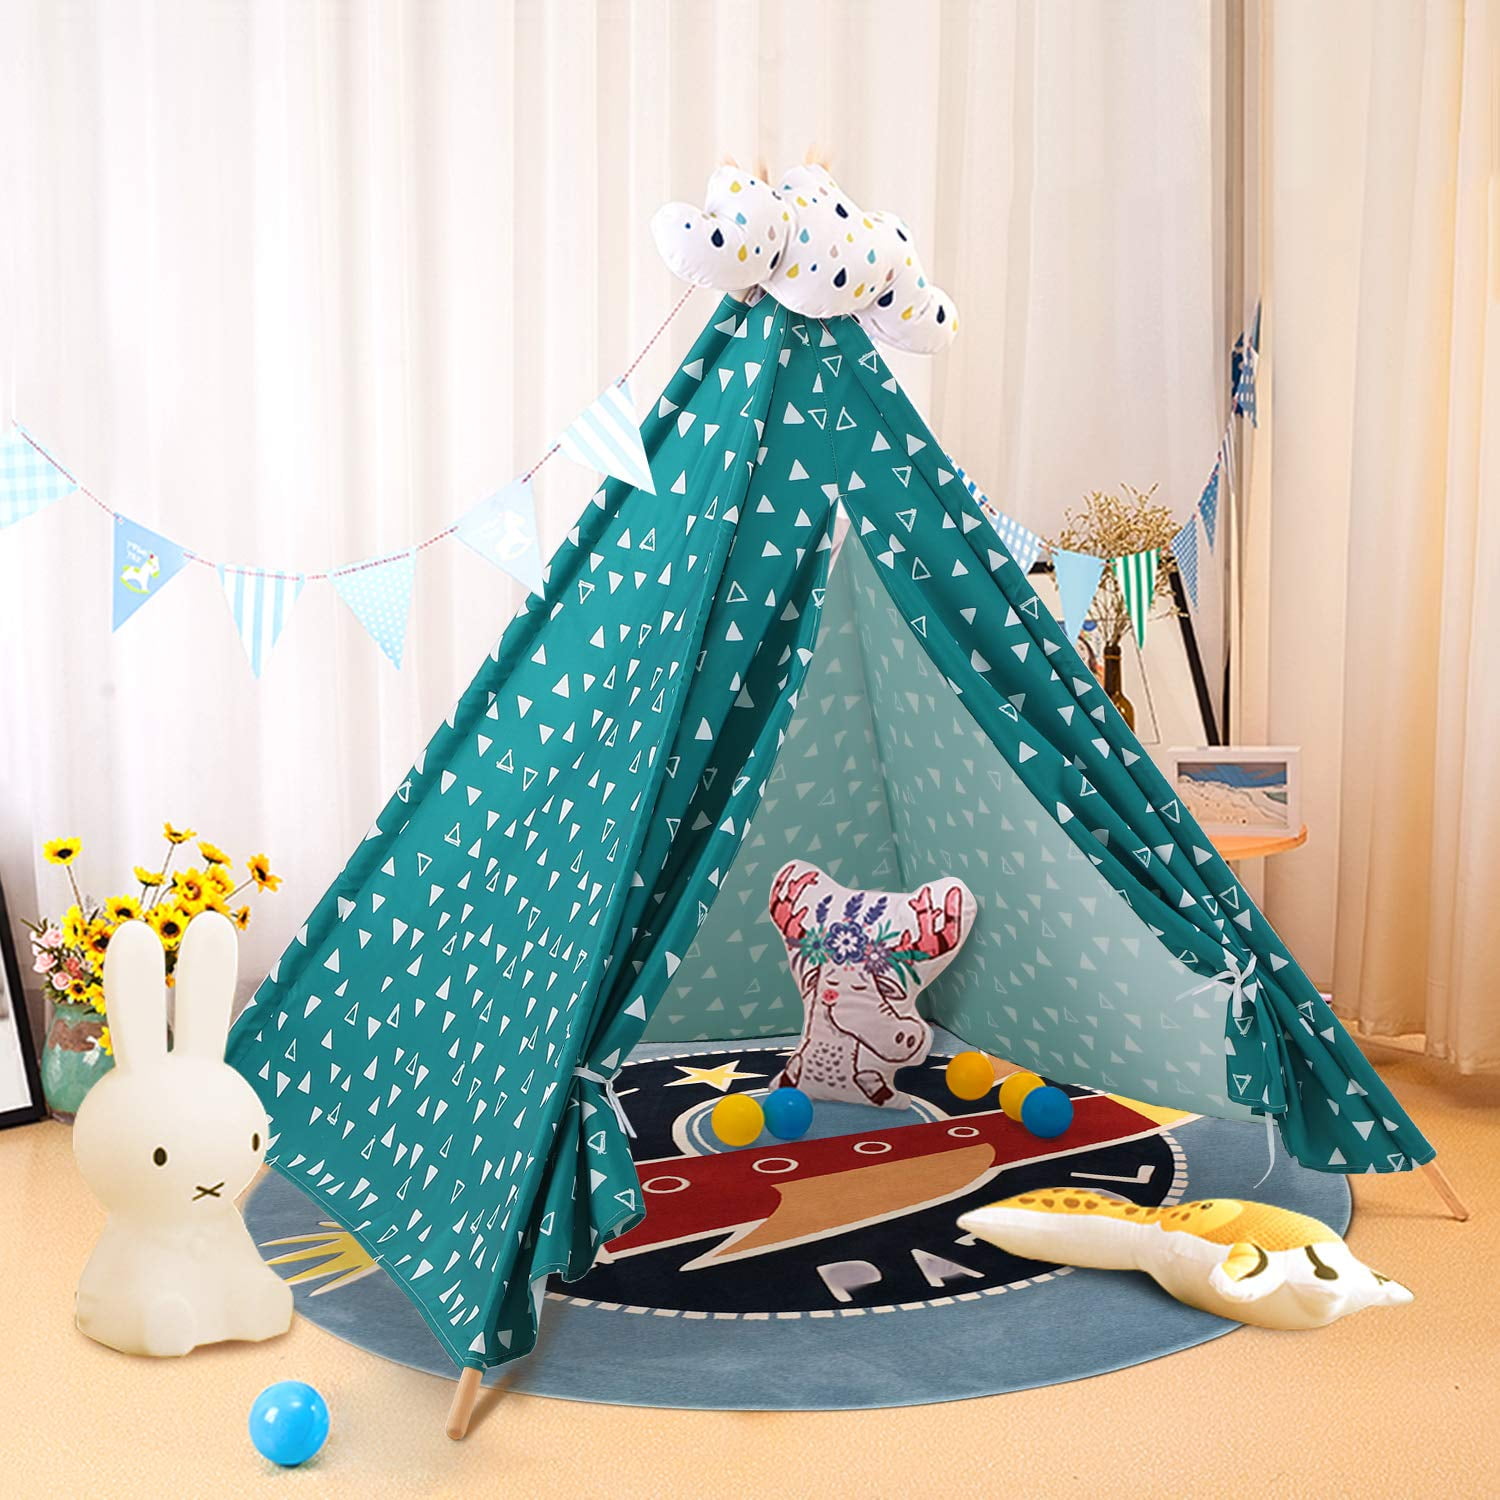 58 x 58 x 56 ALPHA HOME Teepee Tent for Kids Canvas Childs Play Teepee Tent Indoor & Outdoor with Carry Bag 